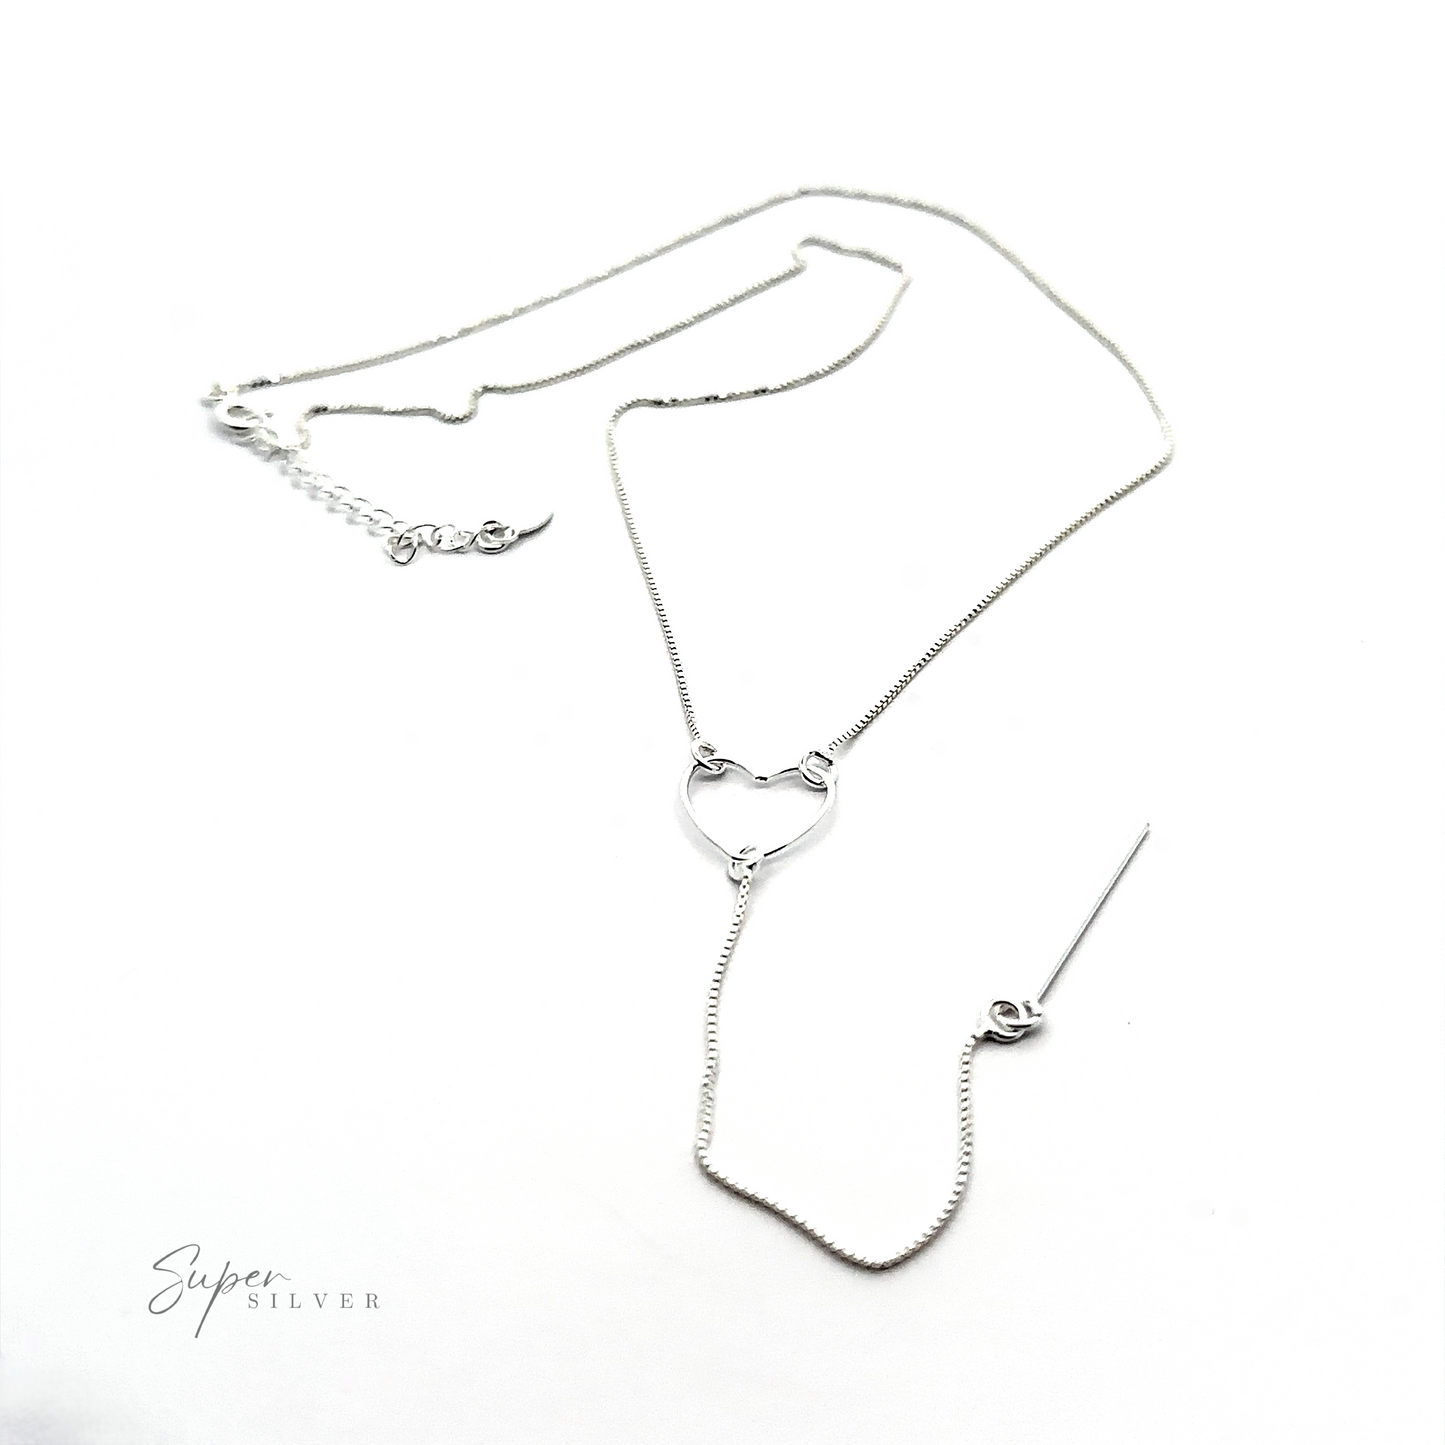 A sterling silver necklace with a small heart-shaped pendant and a slender chain, displayed against a white background. The chain also features an adjustable clasp. Text reads "Open Heart Lariat Necklace.